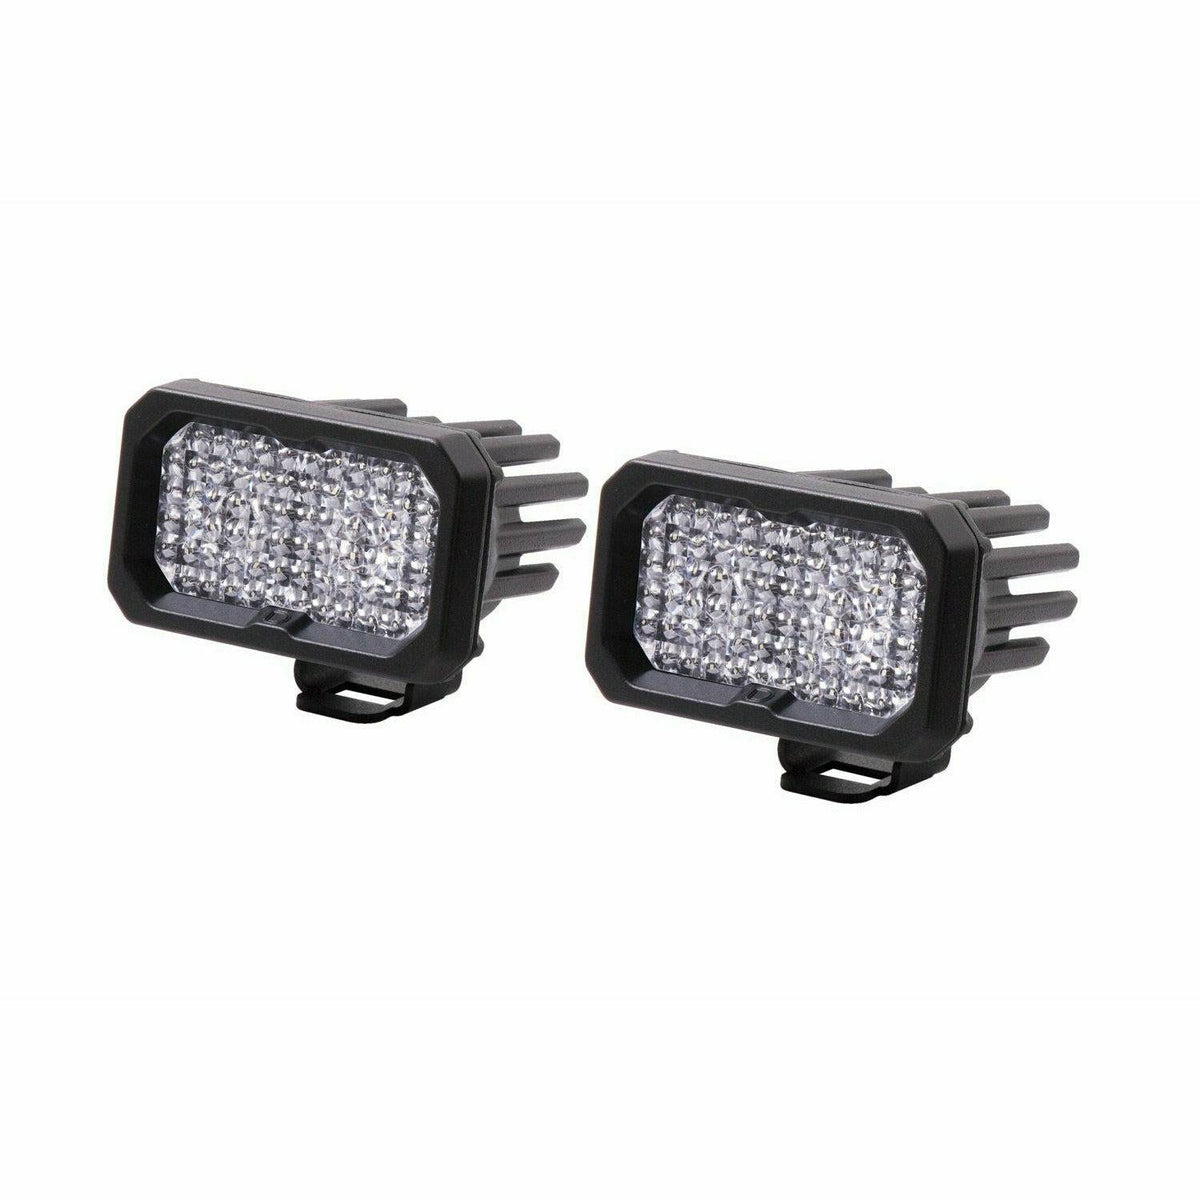 Diode Dynamics Stage Series Sport C2 Pod Lights (Pair)